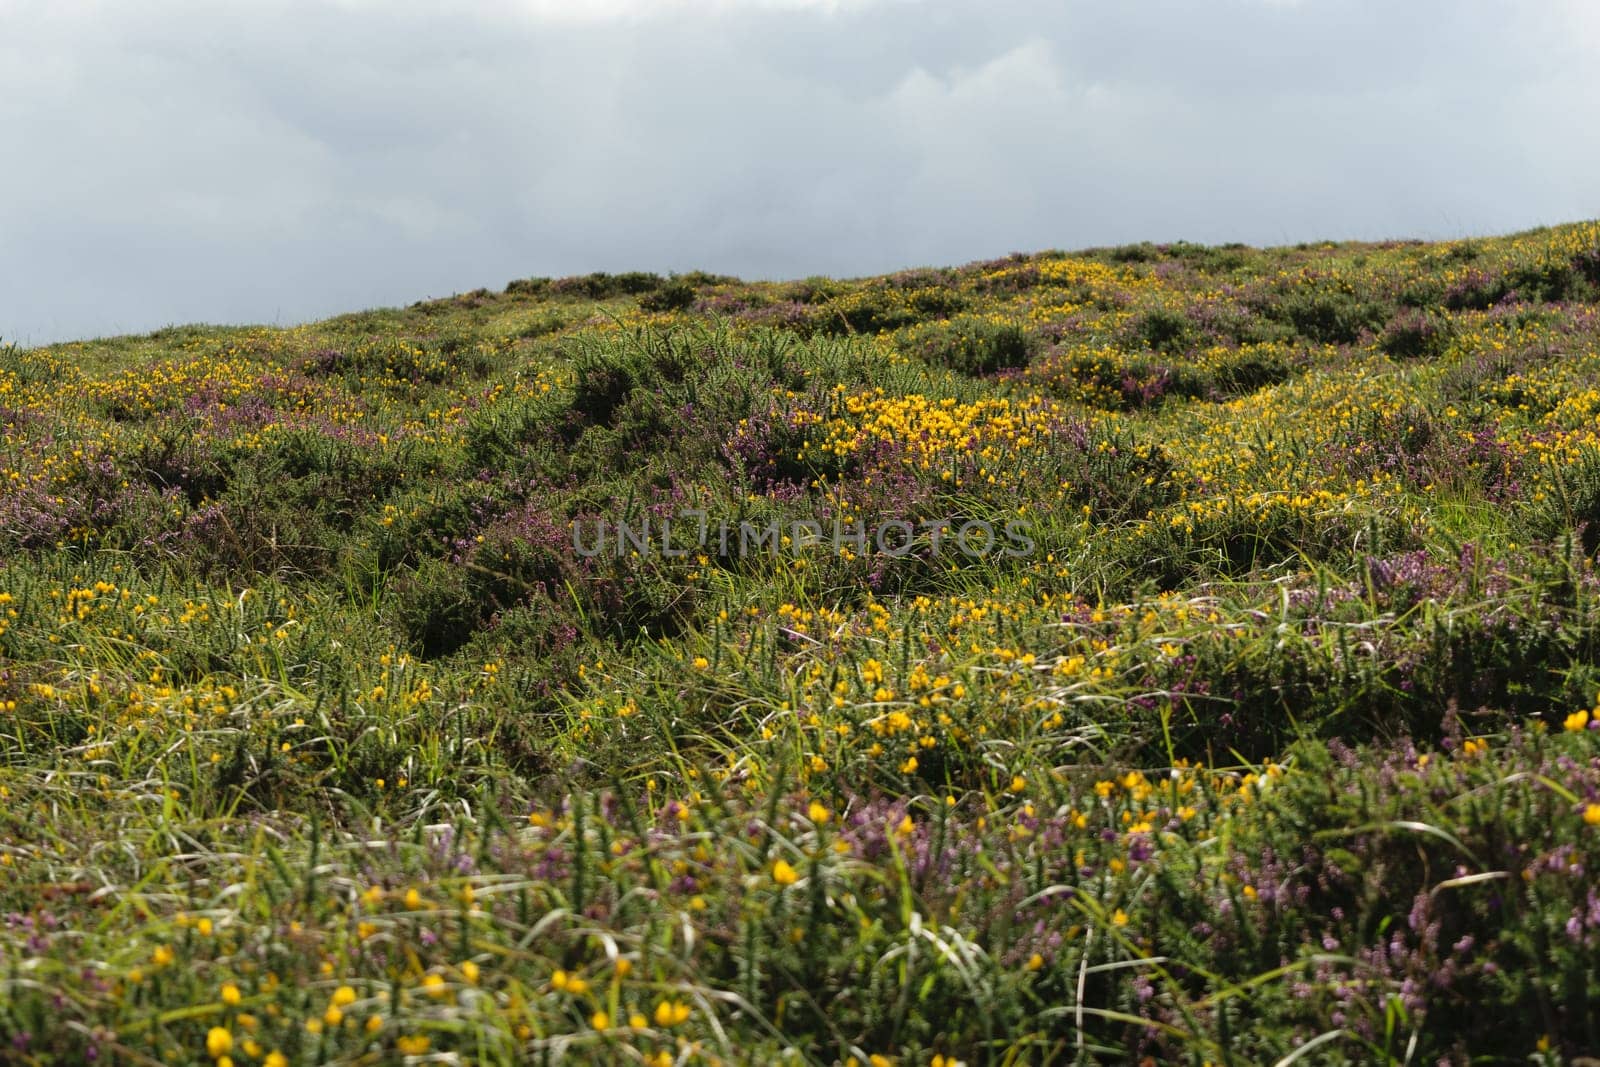 A scenic view of a grassy hill covered with yellow and purple heather under a cloudy sky.